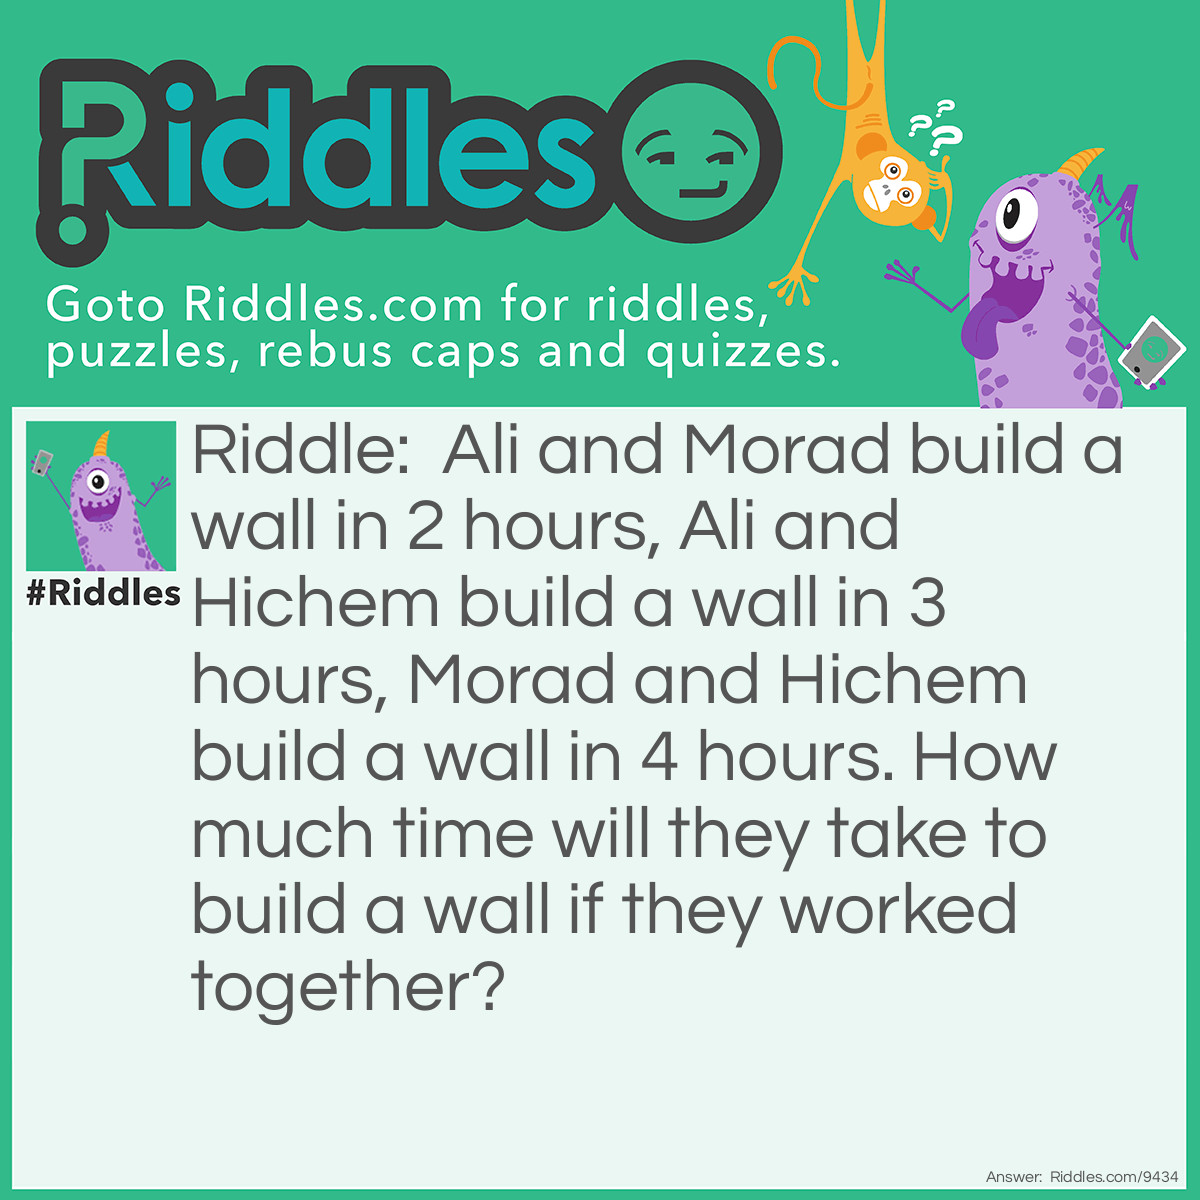 Riddle: Ali and Morad build a wall in 2 hours, Ali and Hichem build a wall in 3 hours, Morad and Hichem build a wall in 4 hours. How much time will they take to build a wall if they worked together? Answer: I don't know